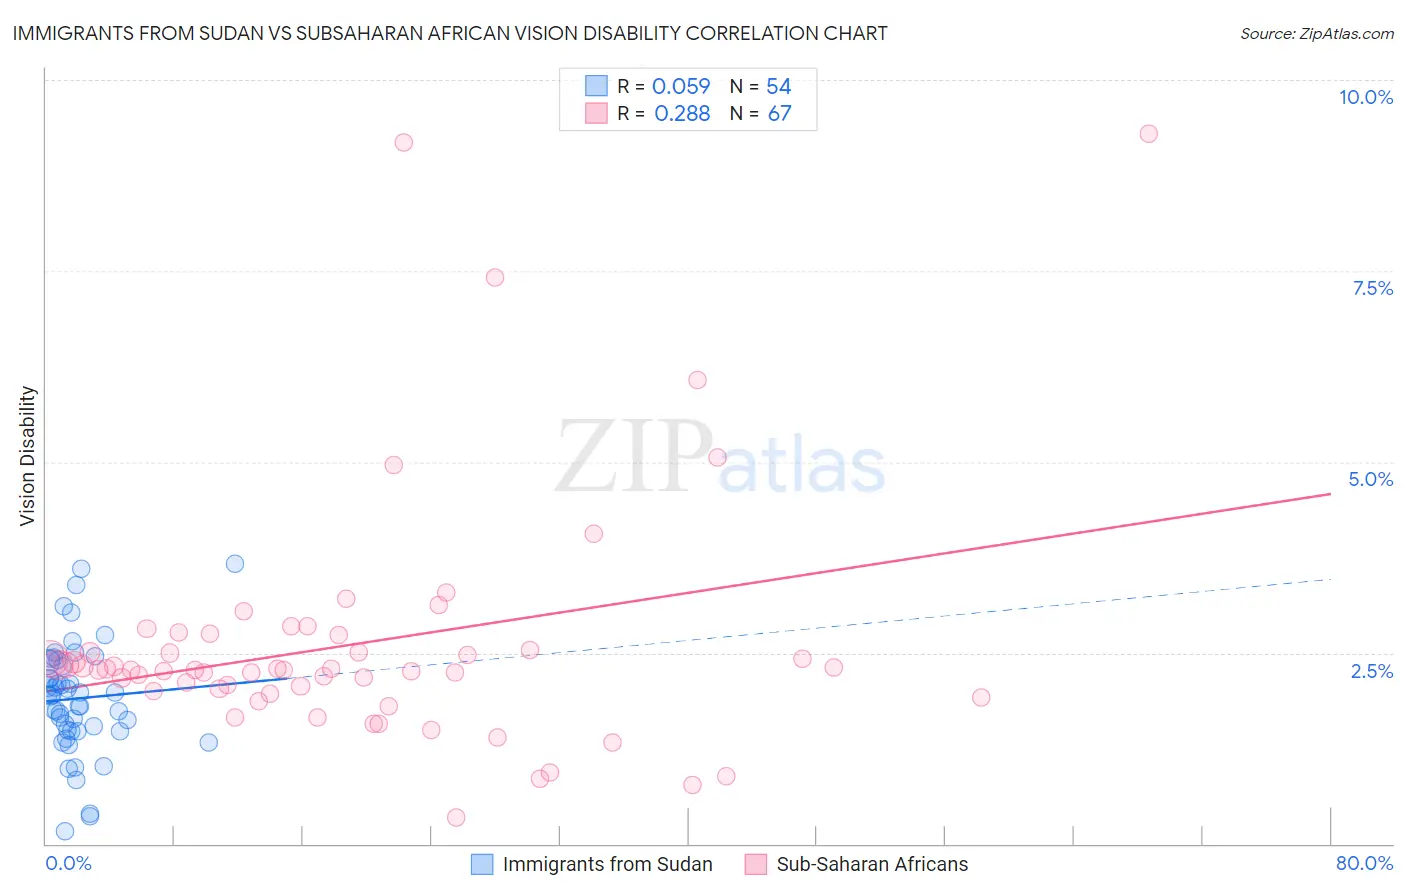 Immigrants from Sudan vs Subsaharan African Vision Disability